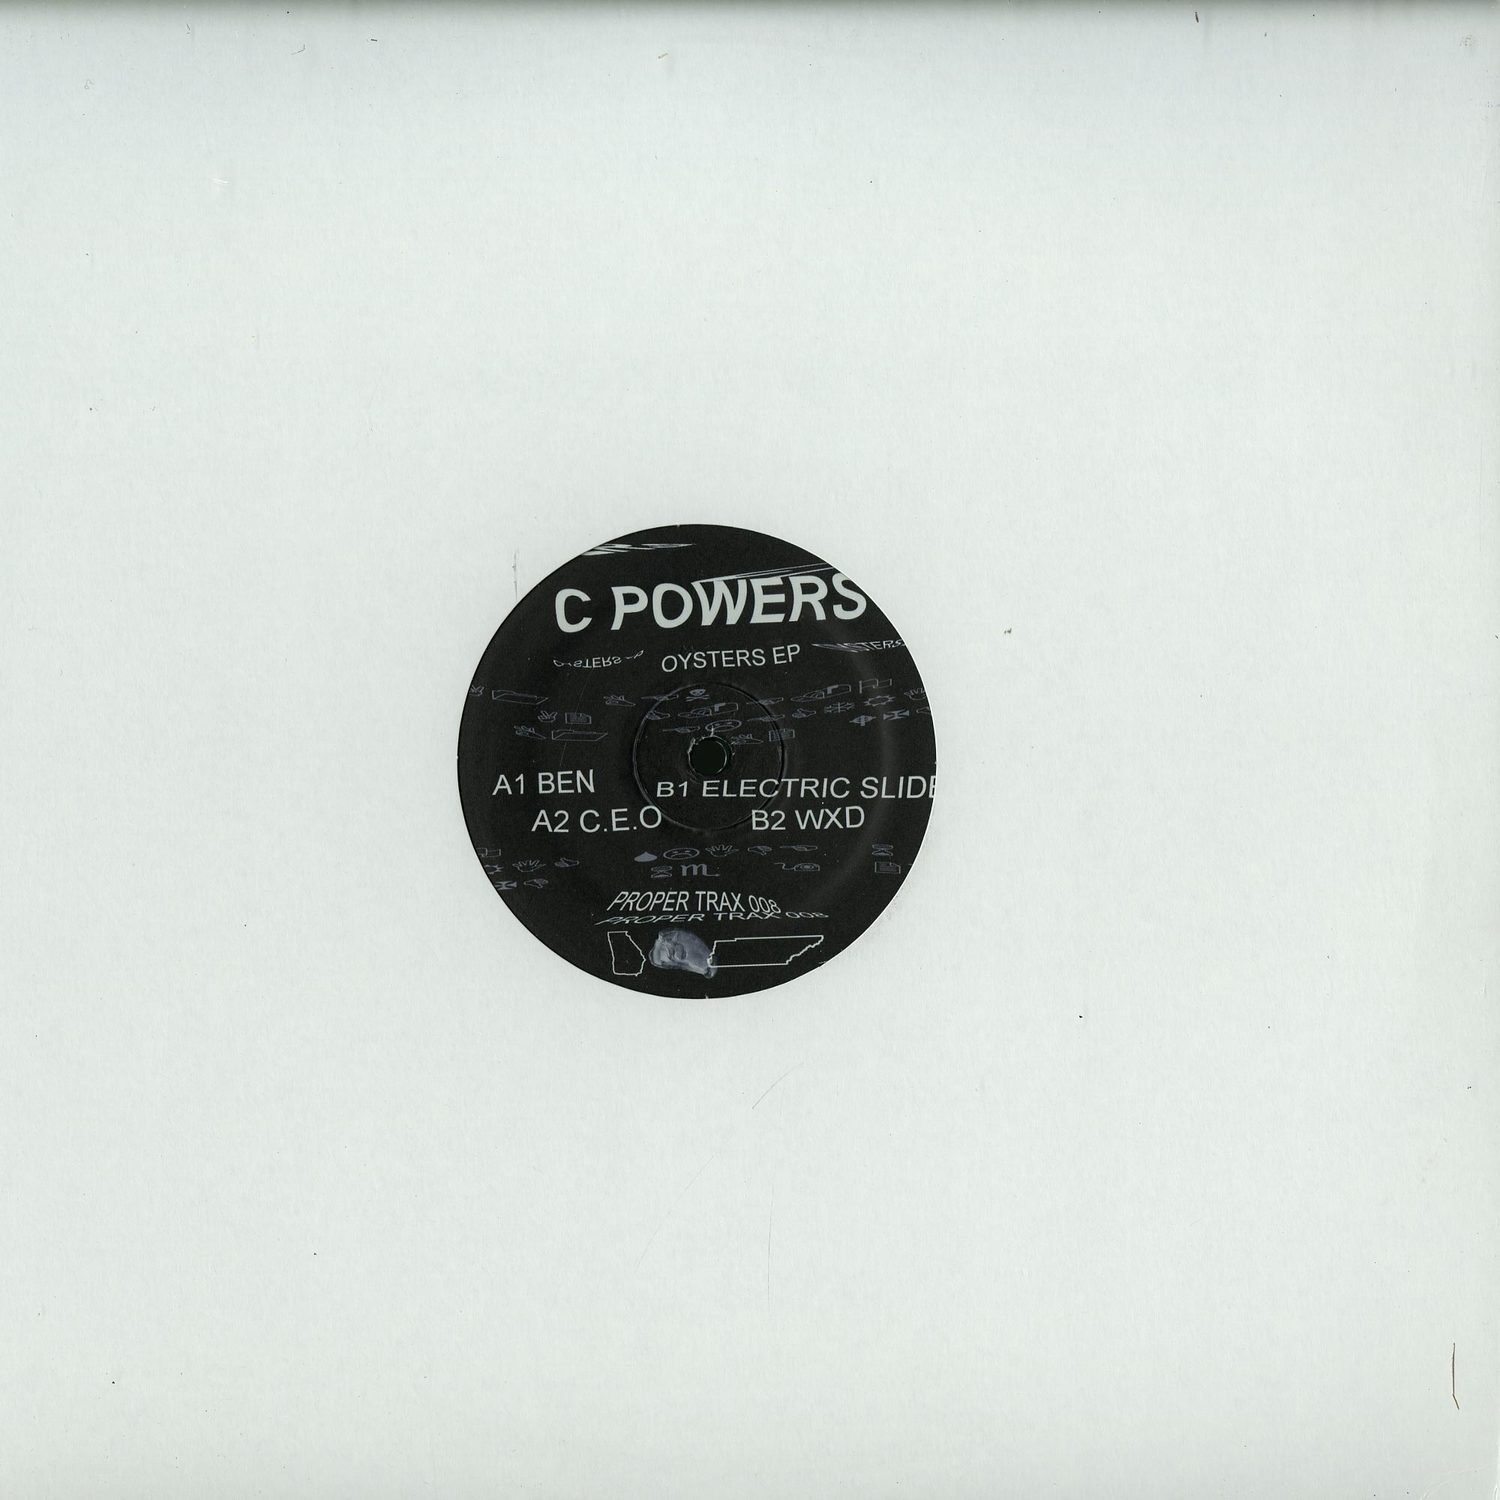 C Powers - OYSTERS EP